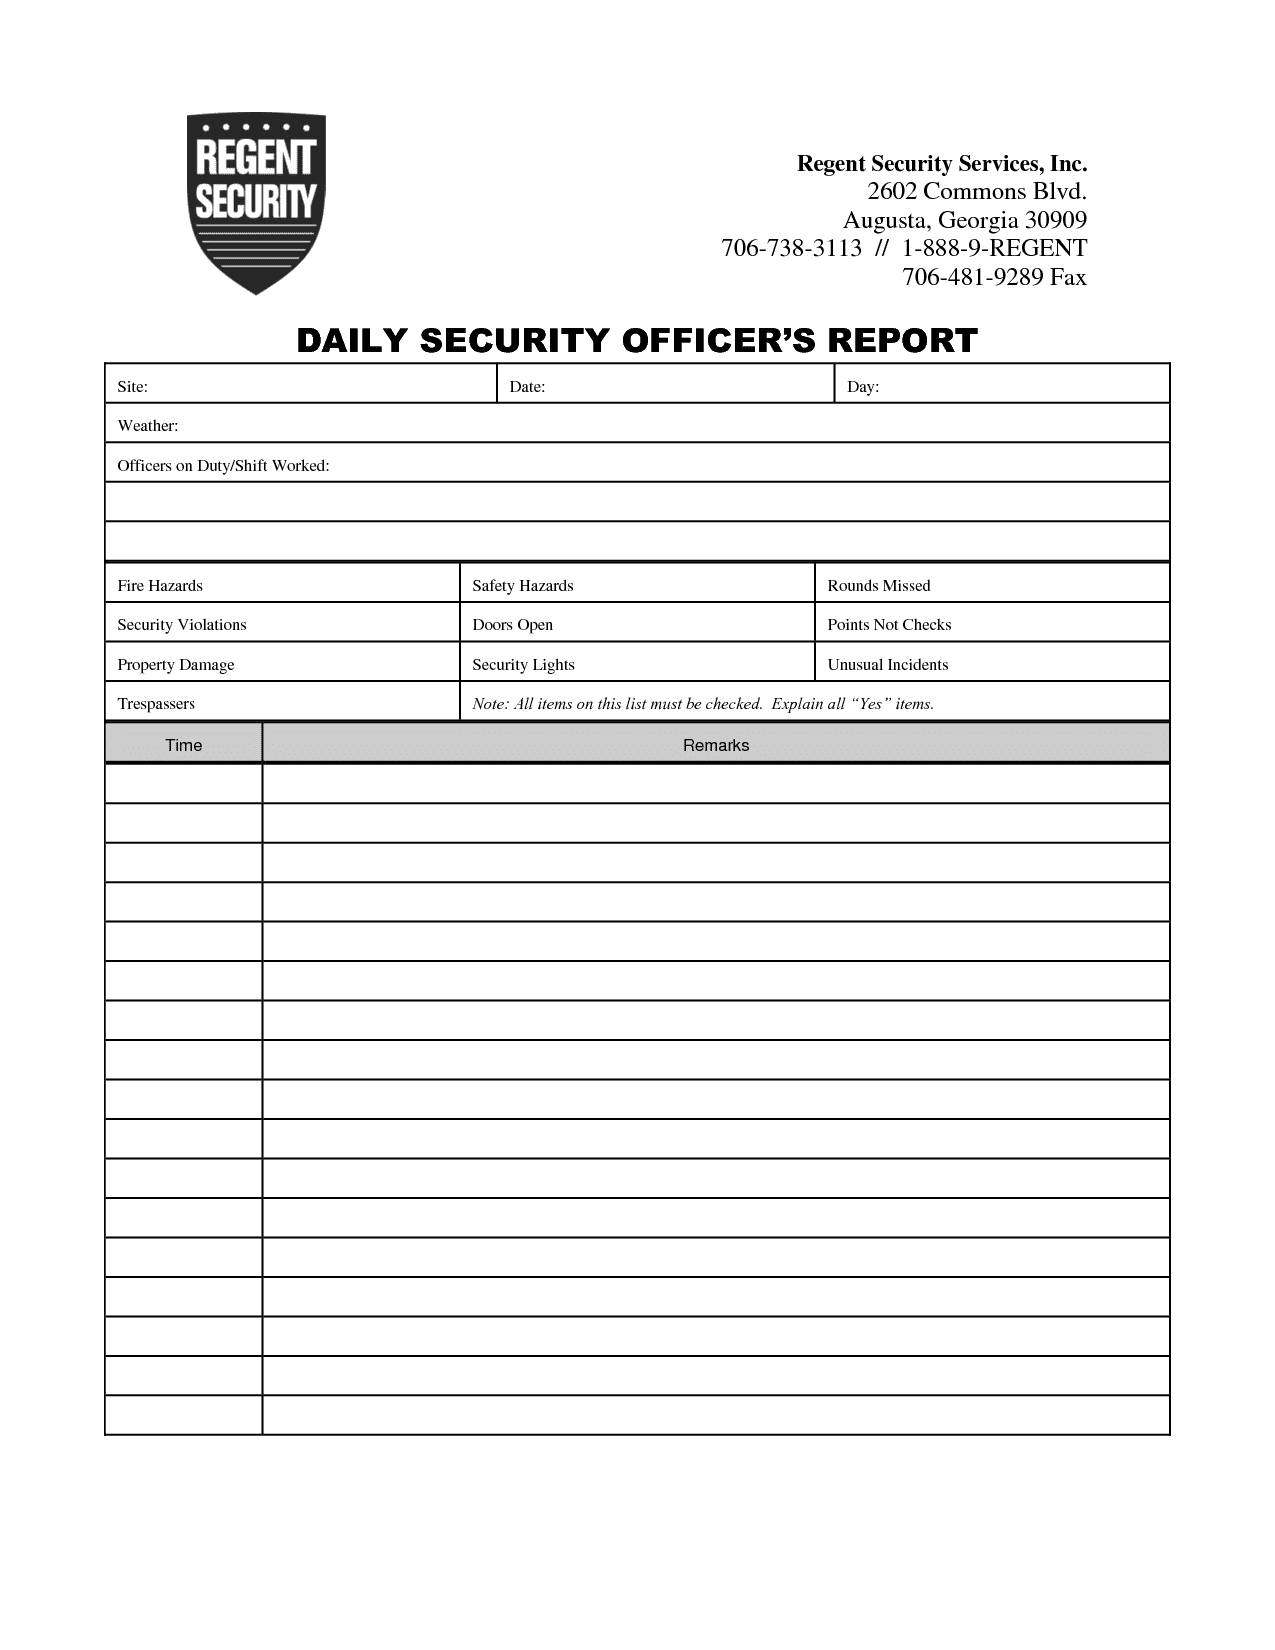 Incident Report Example For Security Guard And Security Patrol Report Example